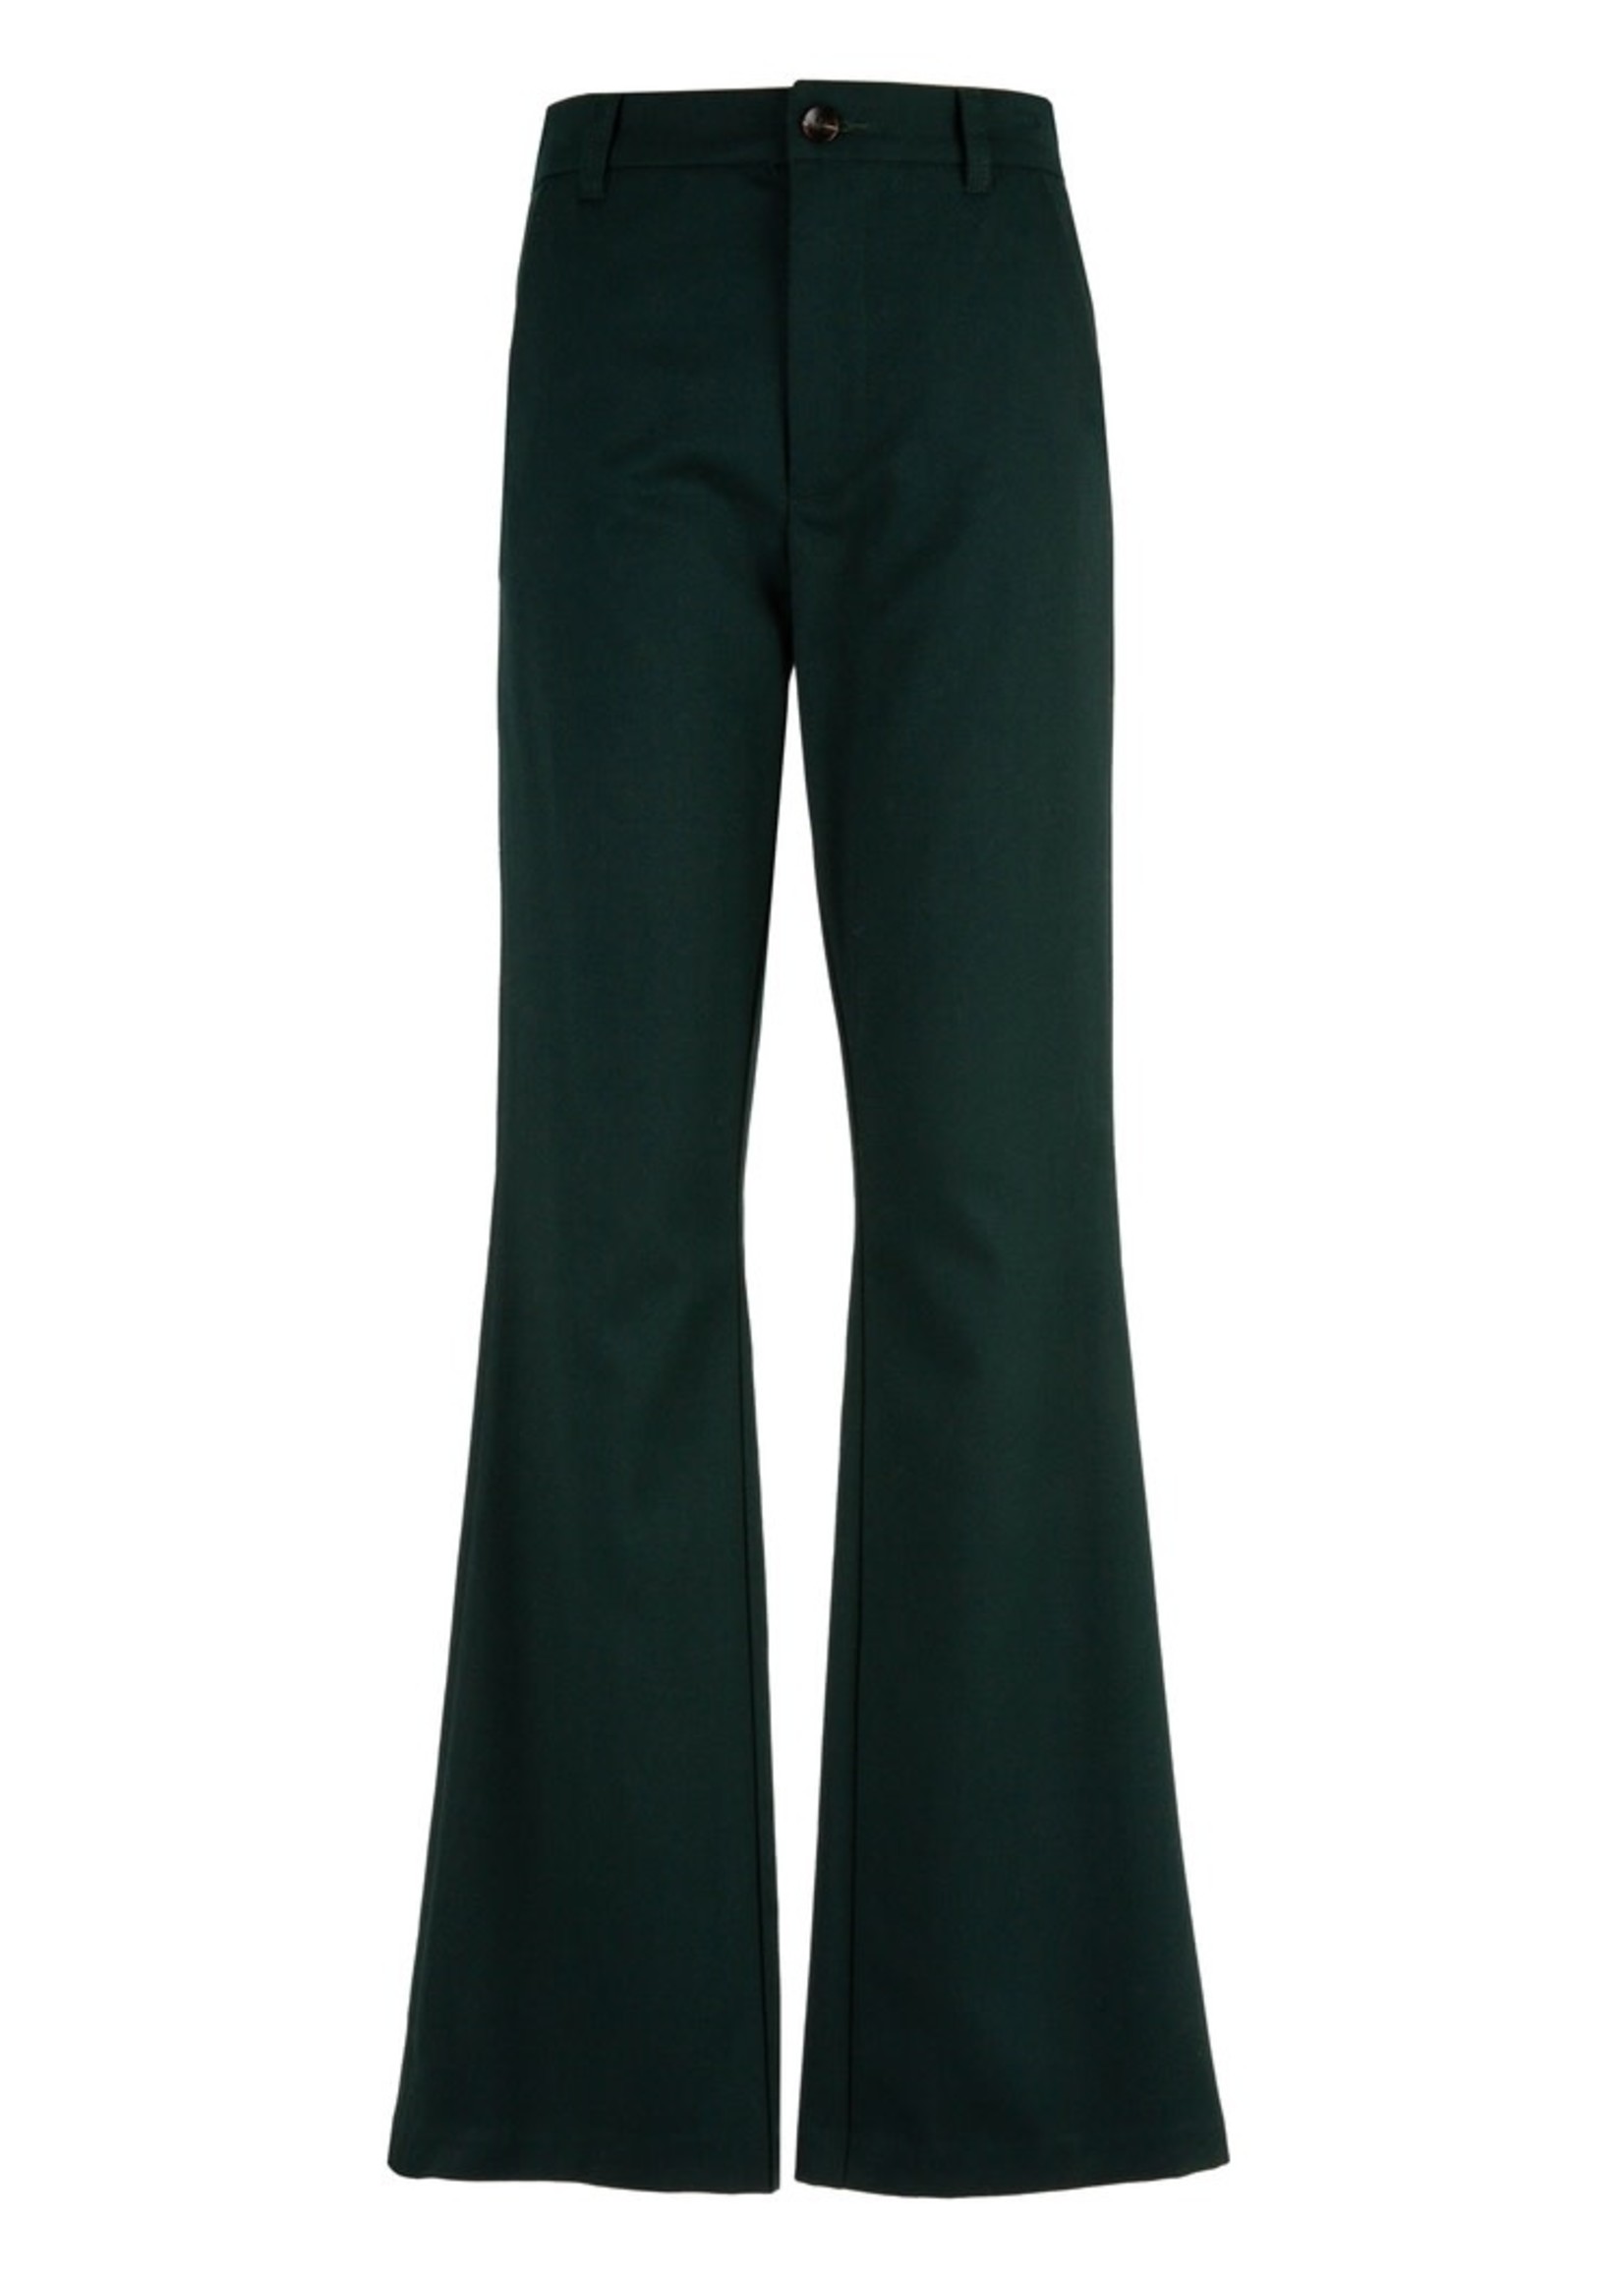 Kut From The Kloth Ana Flare Trousers